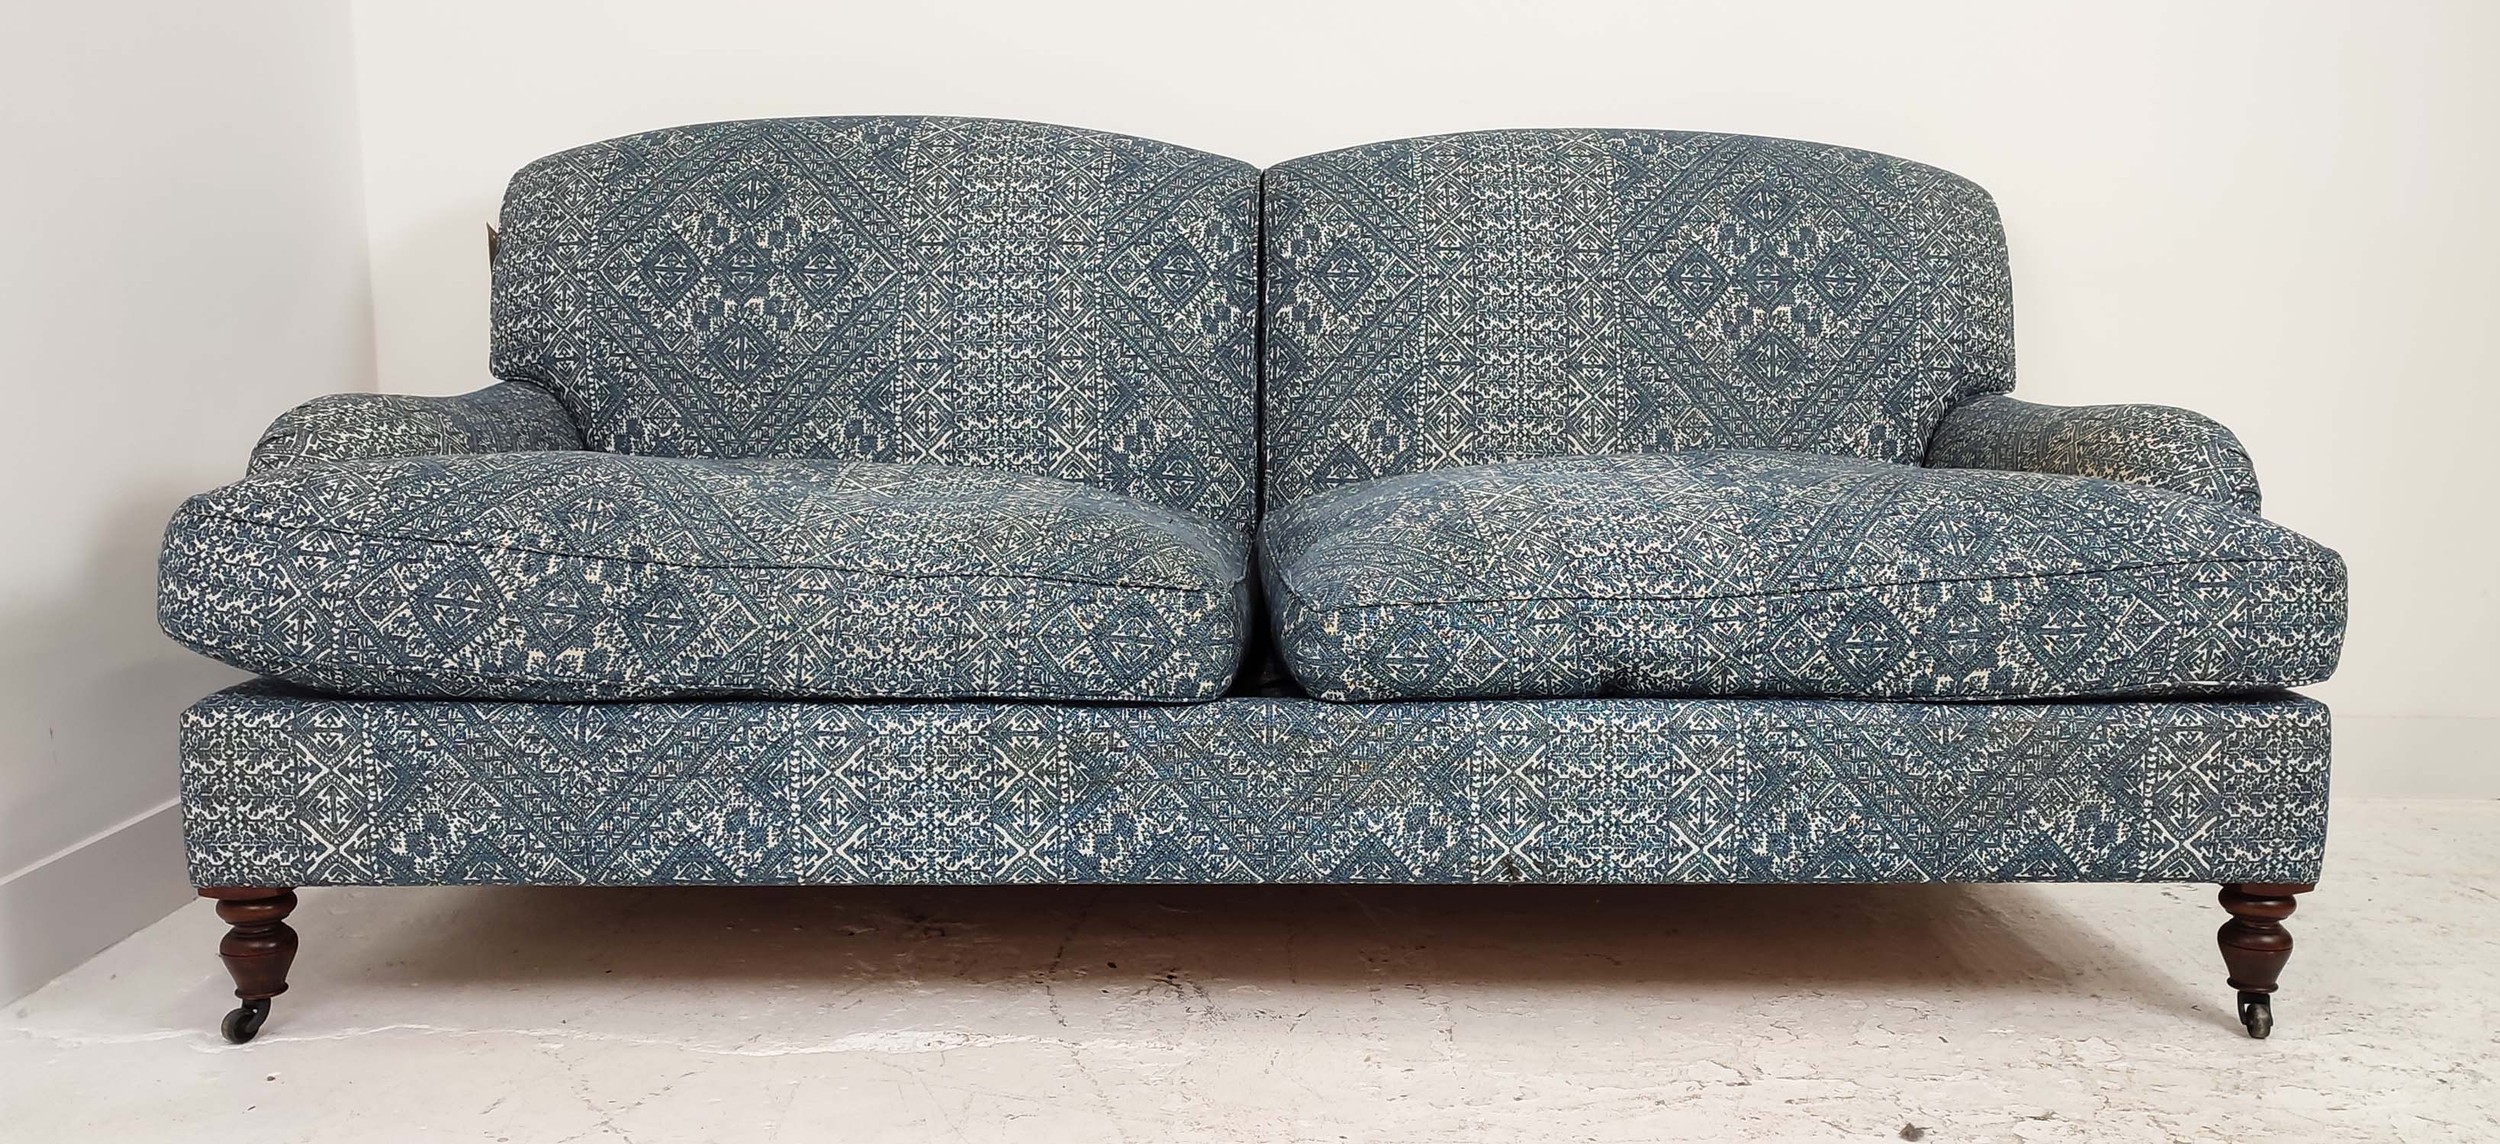 KINGCOME STRATFORD SOFA, in blue upholstery on turned supports, 200cm W x 88cm H x 95cm D. - Image 2 of 7